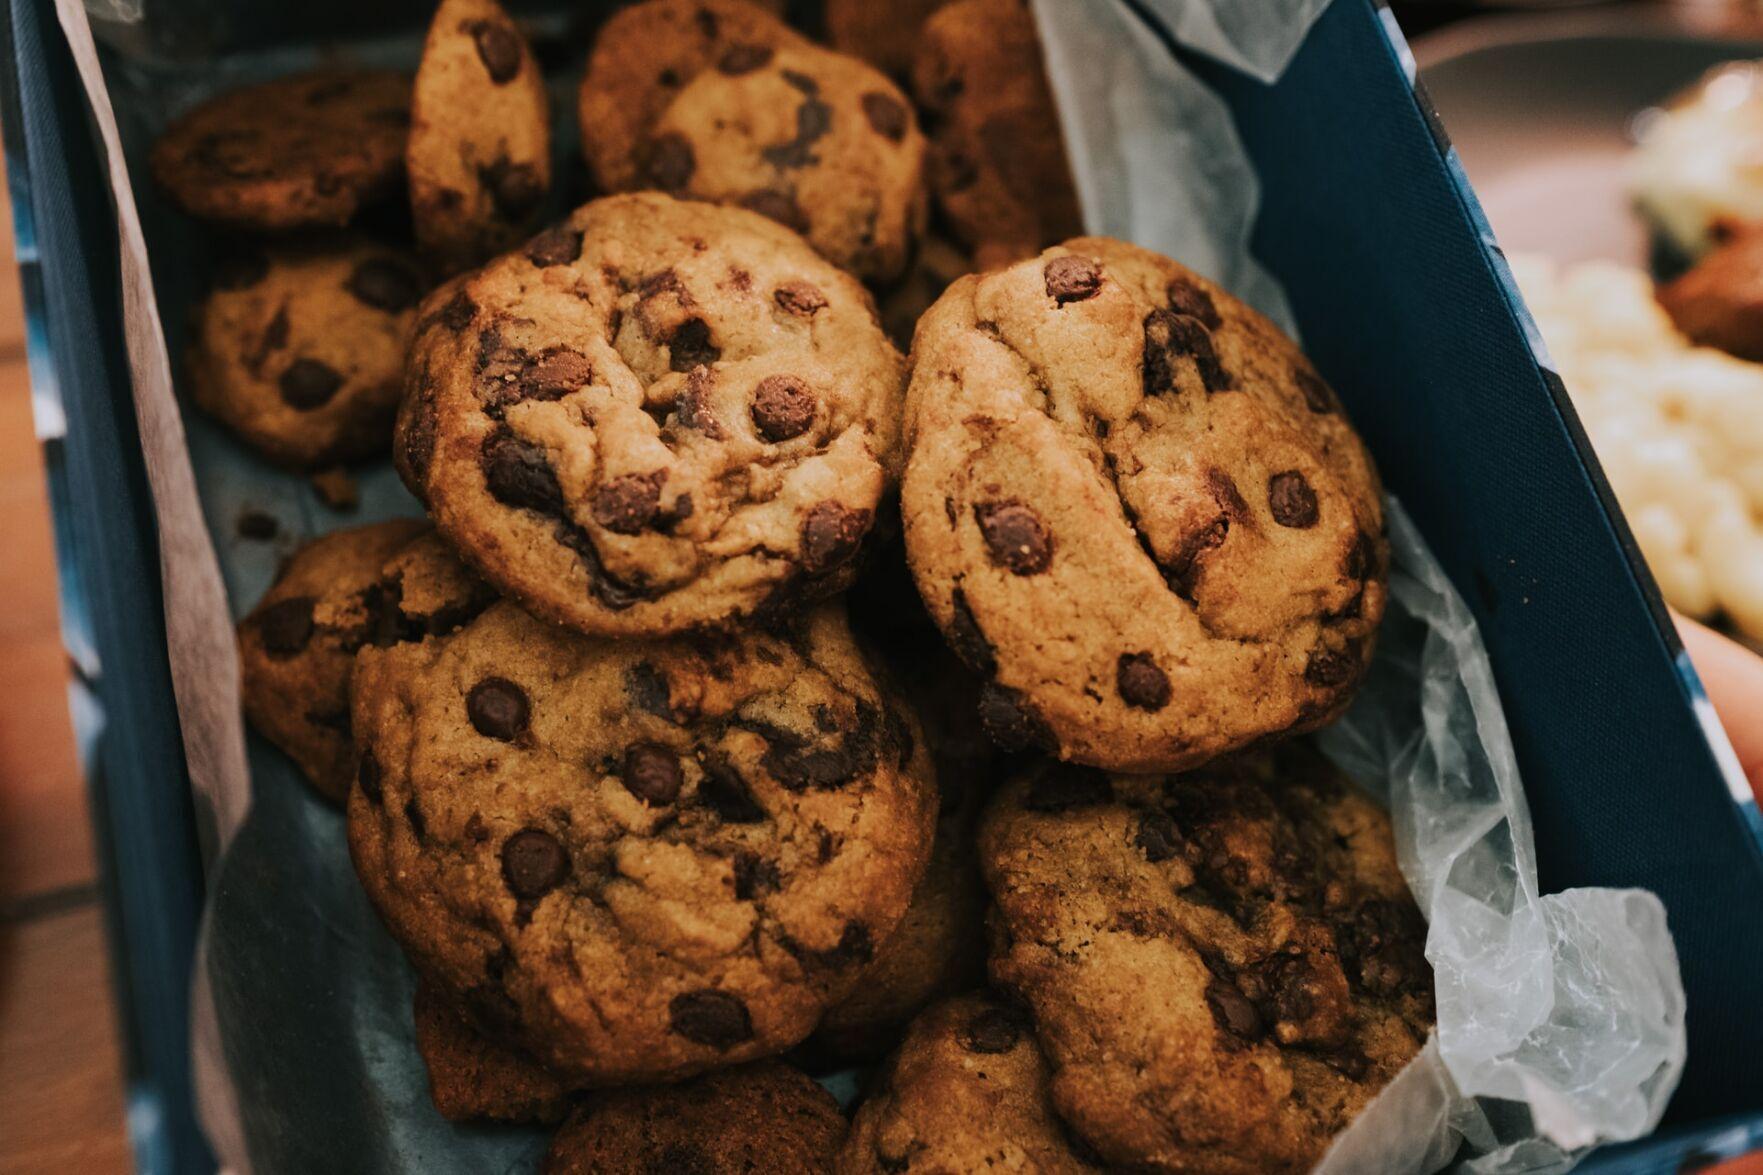 These healthy cookie recipes from TikTok are an everyday treat